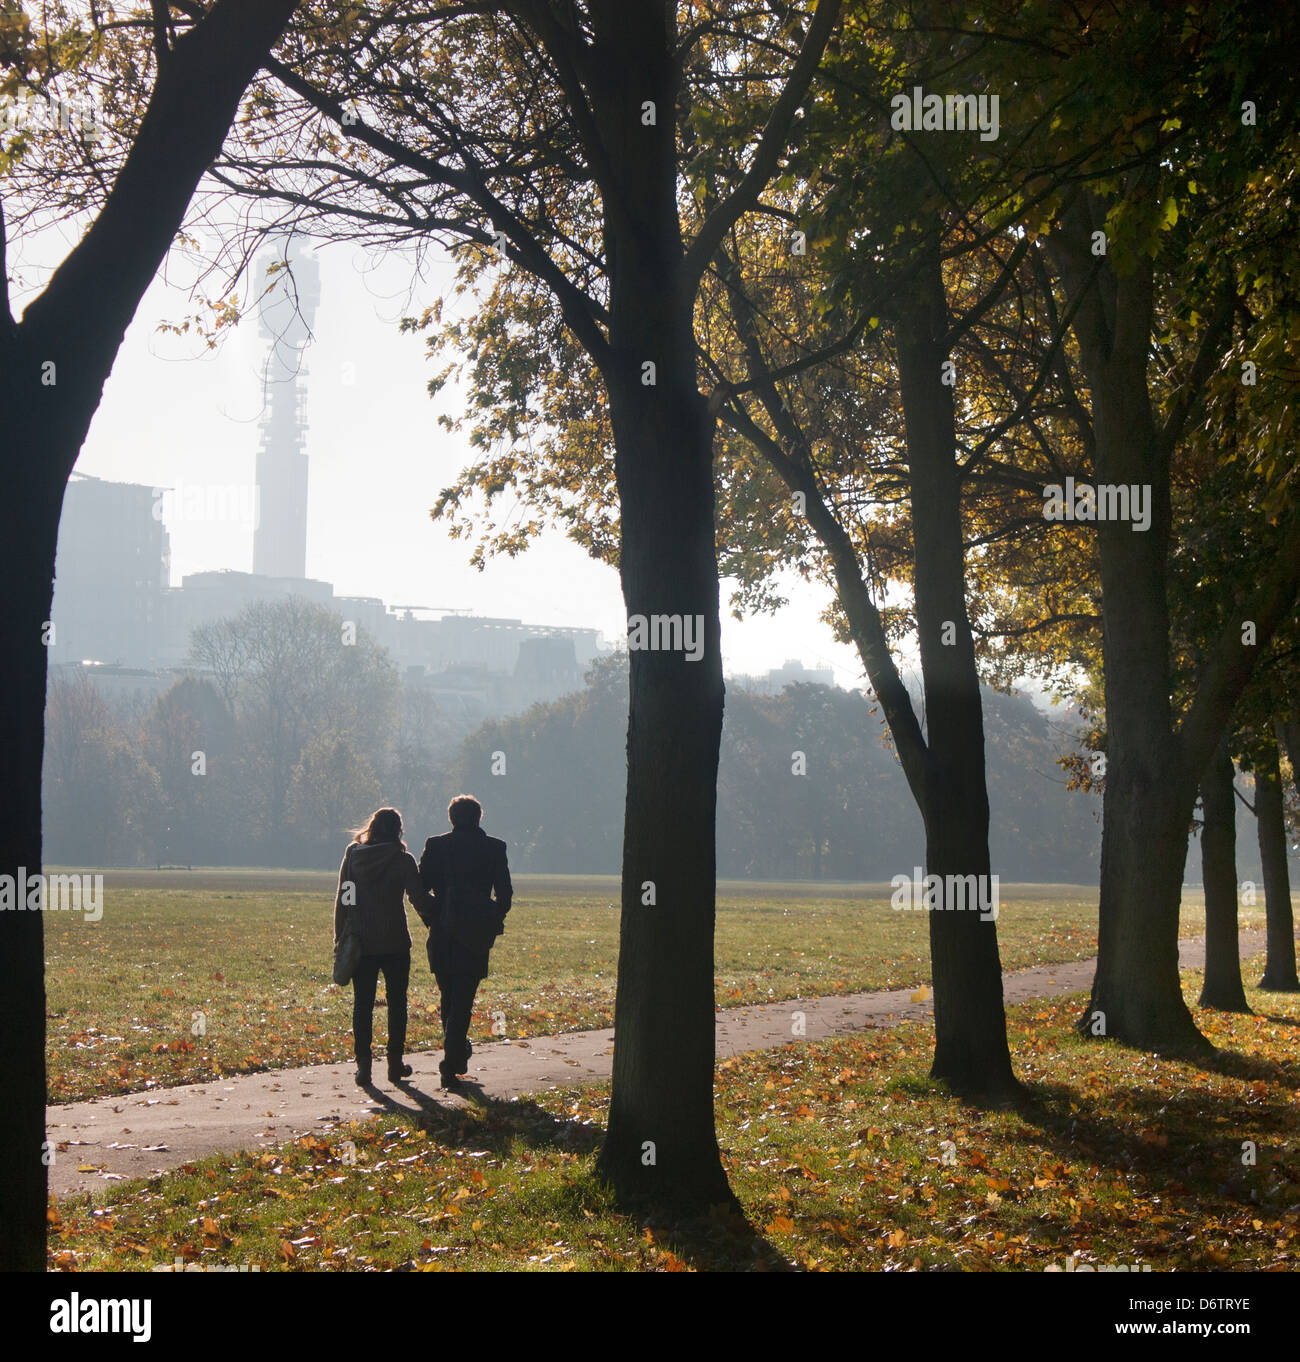 Couple walking through The Regent's Park in early autumn morning with BT Tower in silhouette in distance London England UK Stock Photo